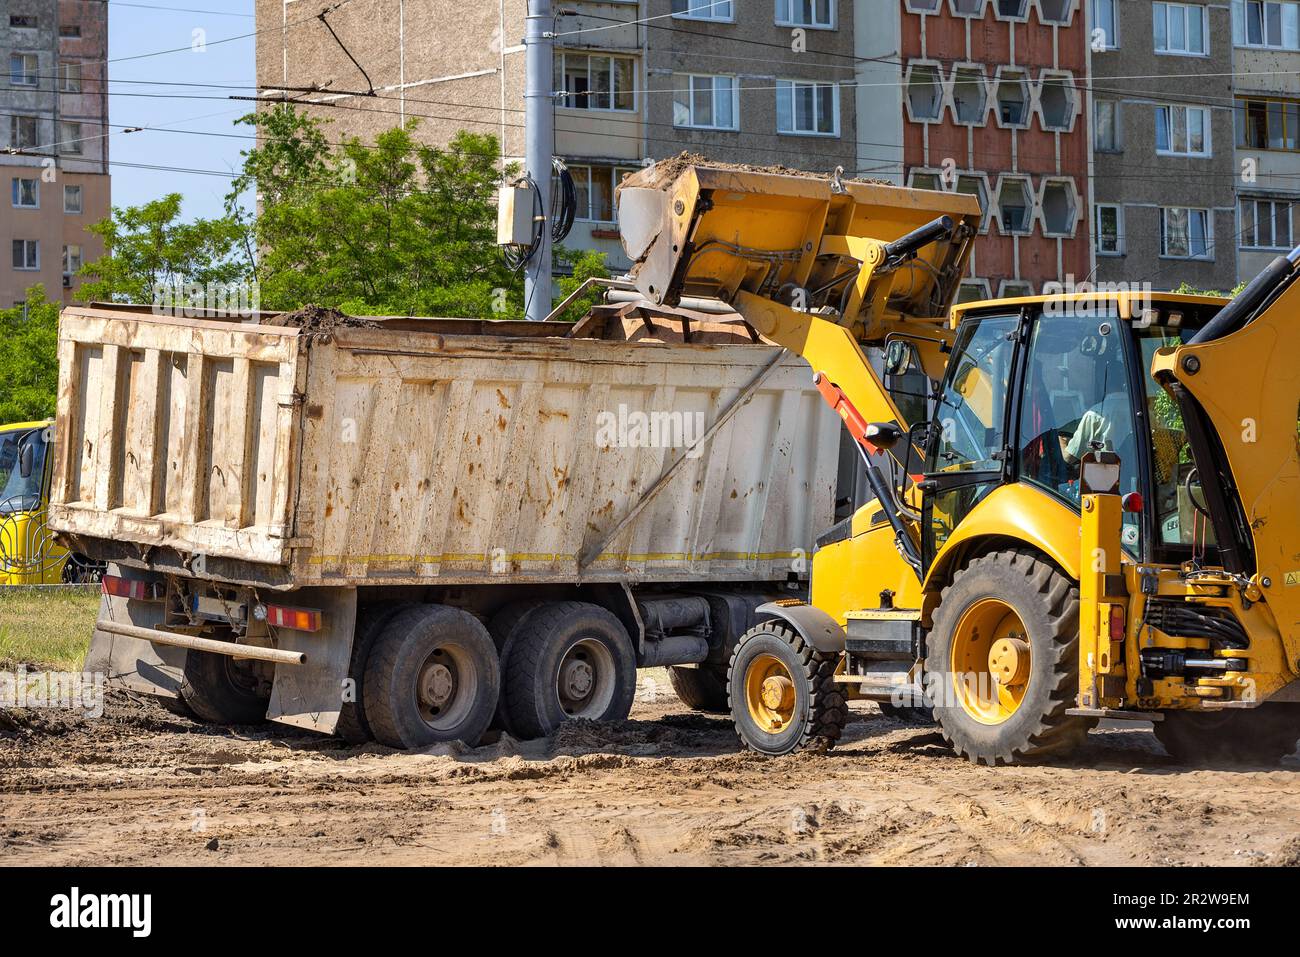 A large tractor bucket pours soil into the back of a large truck at a road construction site. Stock Photo